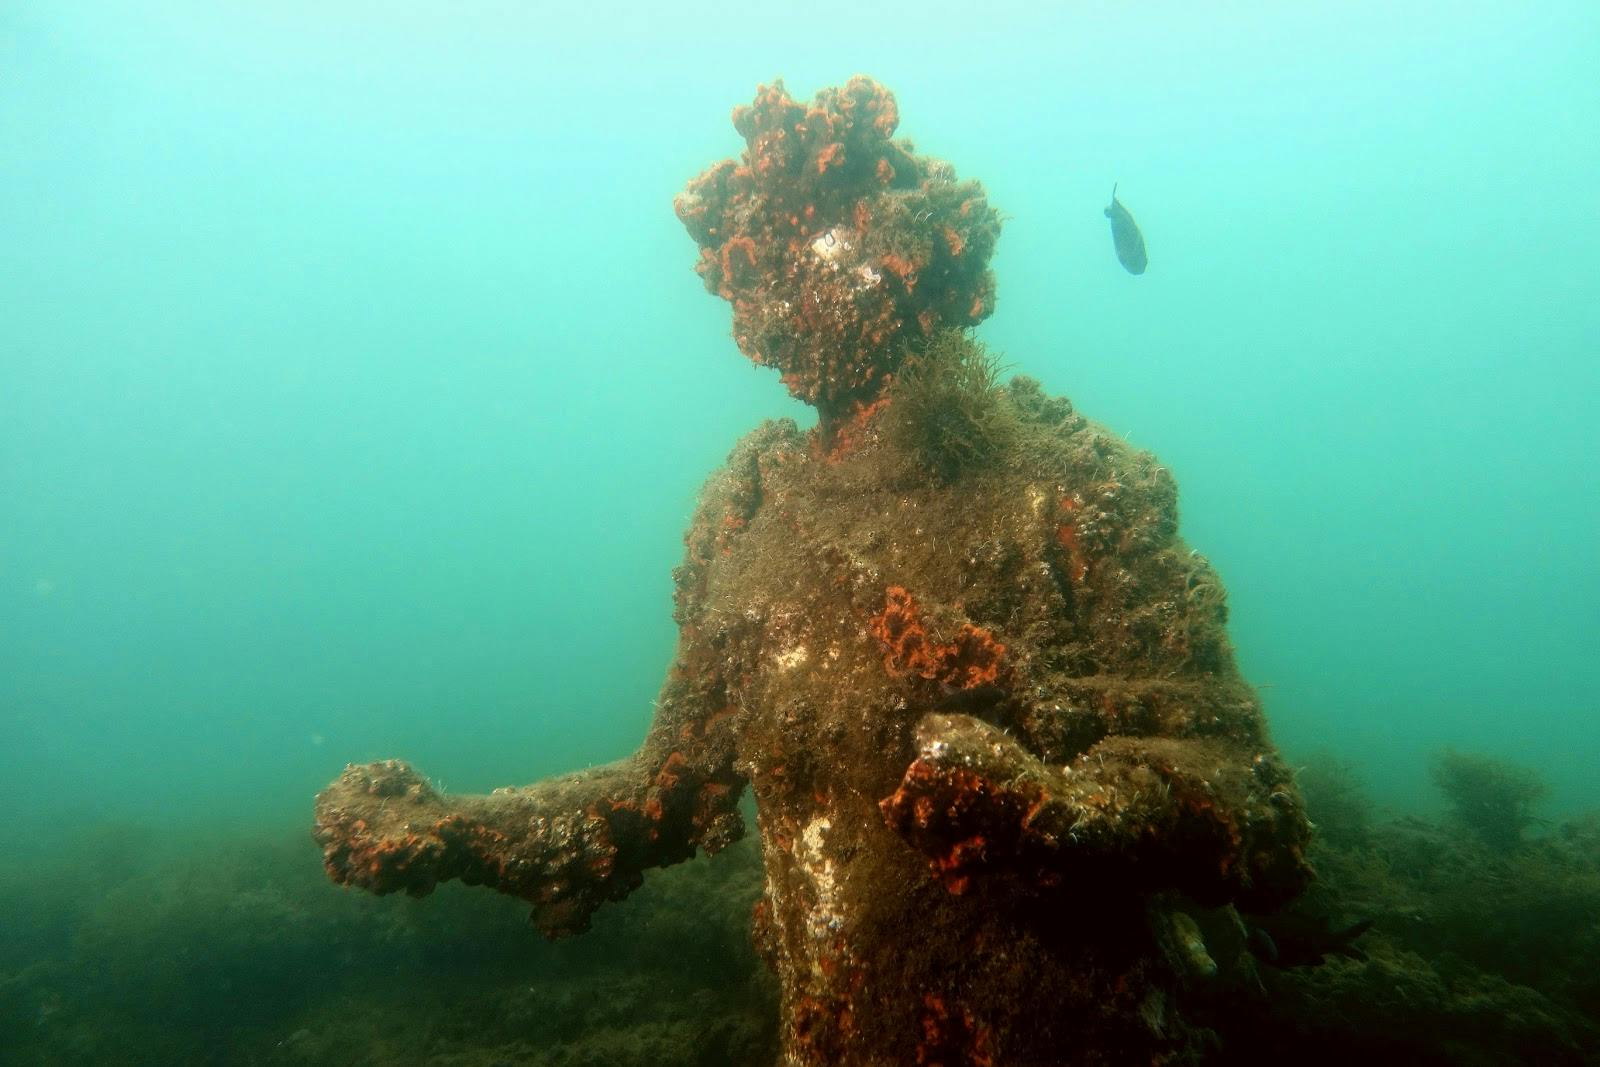 Image - Underwater Archaeological Park of Baia